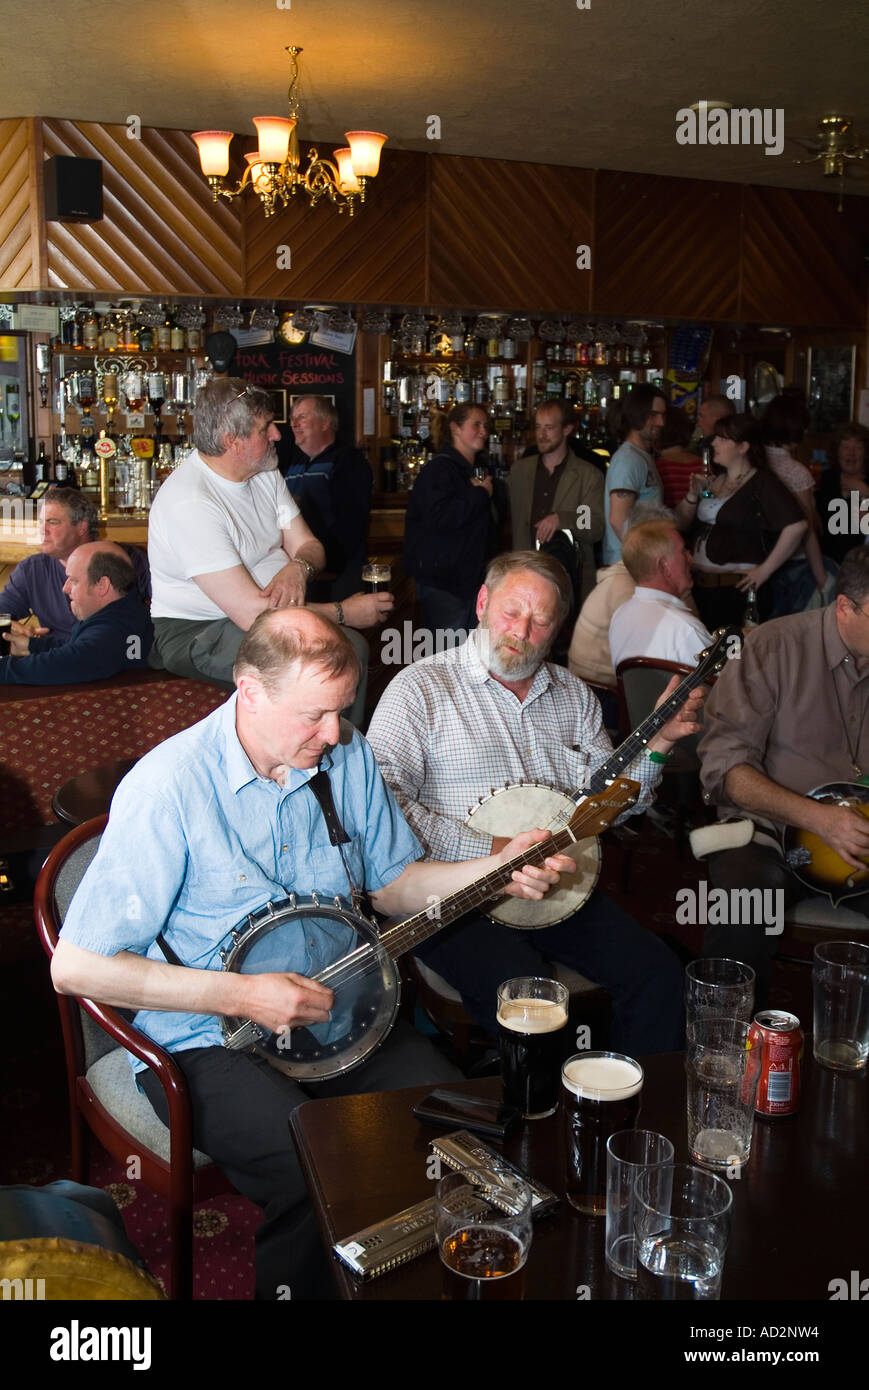 dh Orkney Folk Festival STROMNESS ORKNEY Musicians playing banjos Stromness Hotel lounge bar Stock Photo